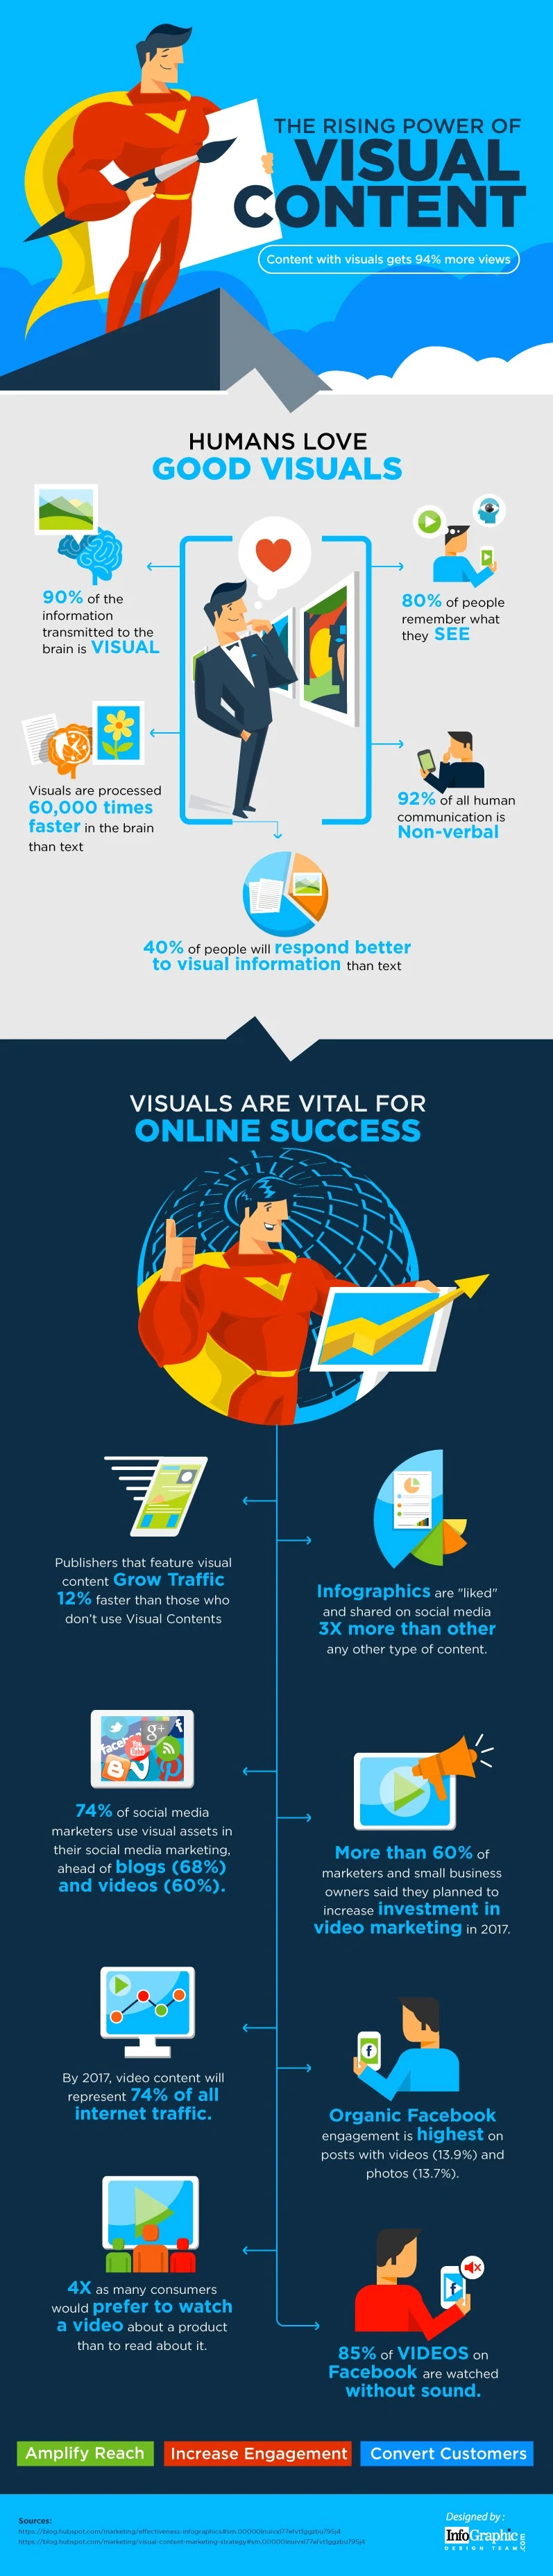 The Rising Power of Visual Content - #infographic